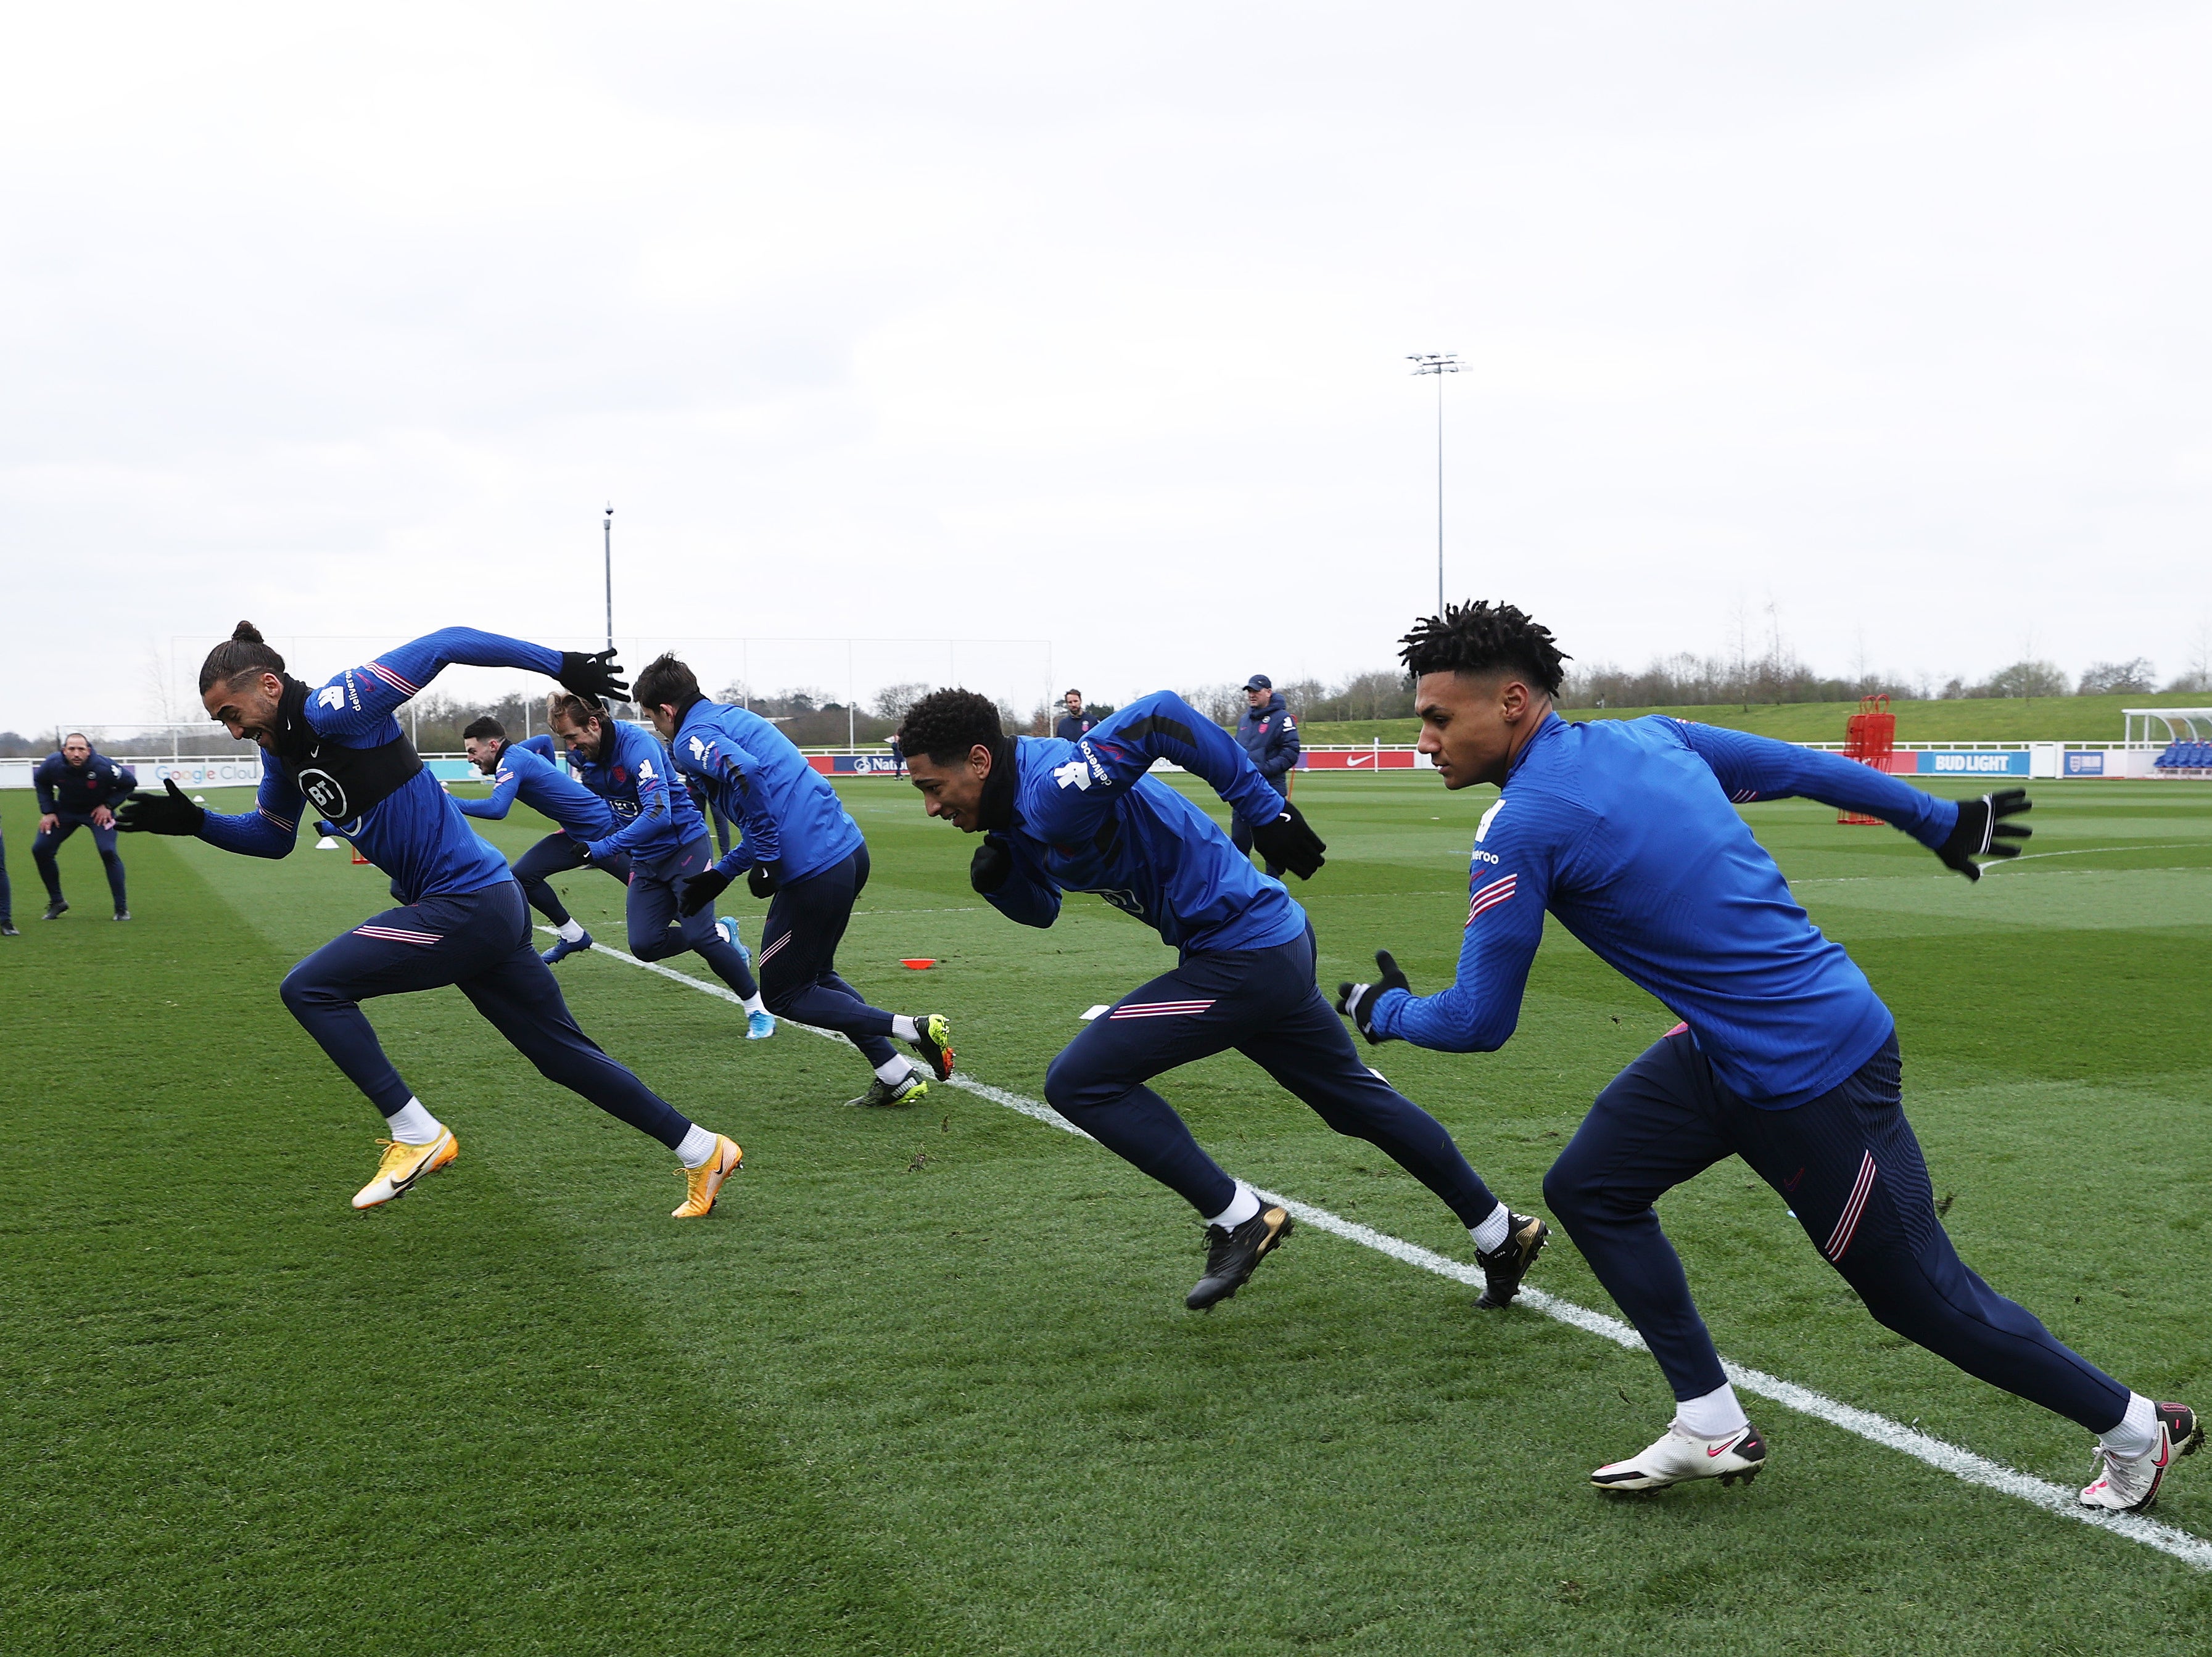 England in action during a training session